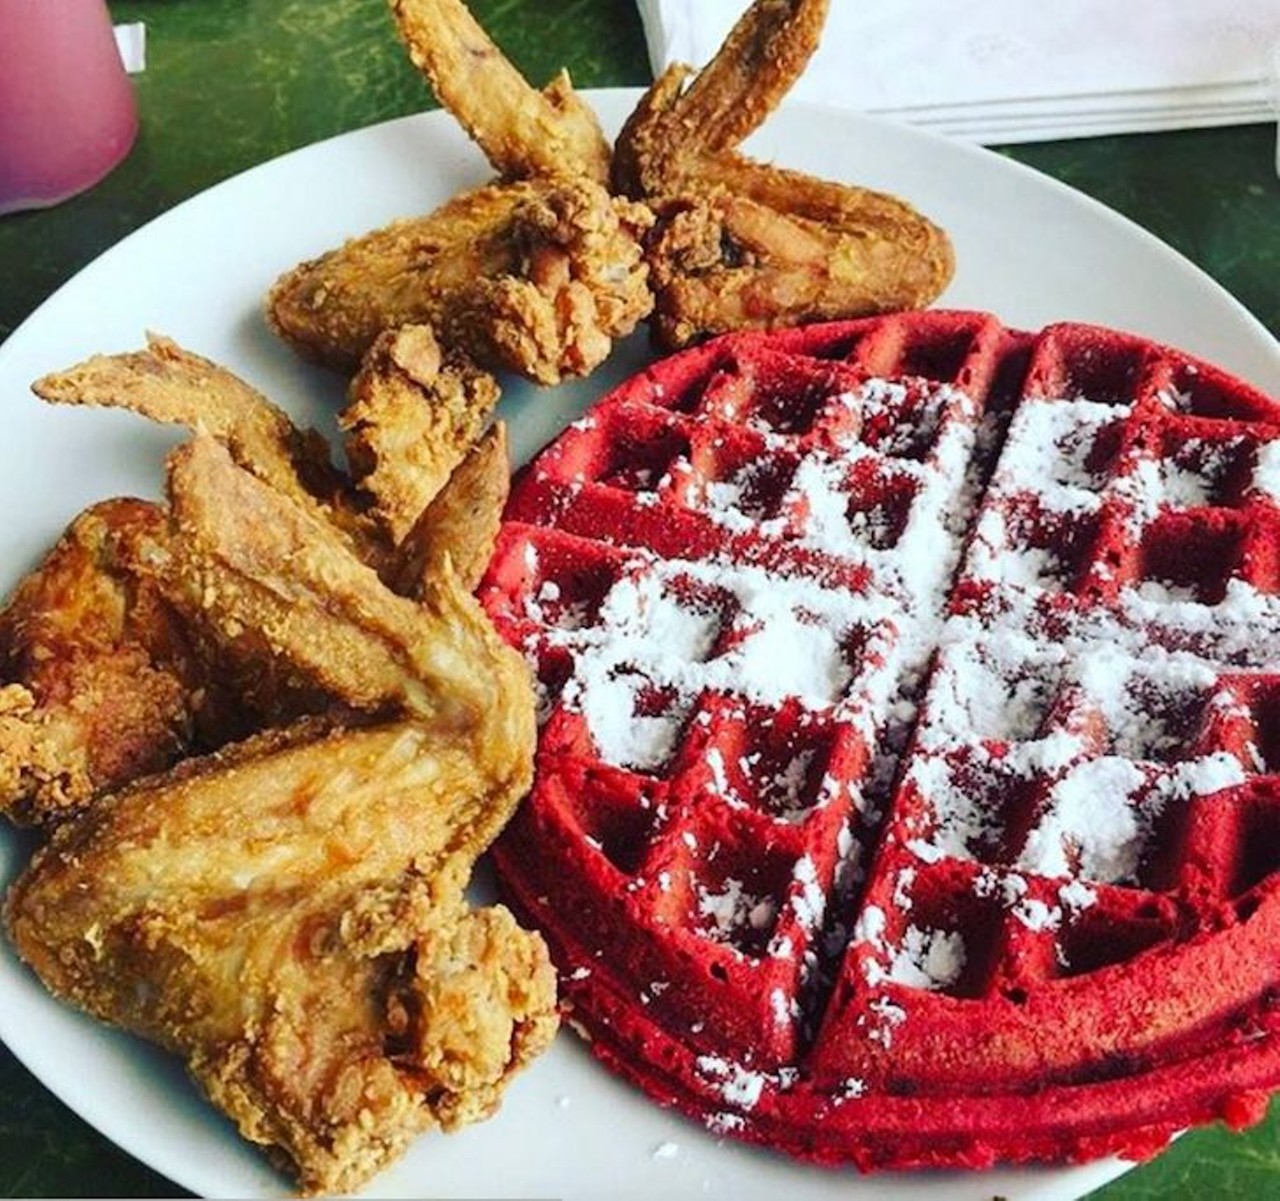 Fried Chicken from Chef Eddies
595 W. Church St., 407-826-1731 
Chef Eddie's soul food has treated Orlando to a range of crispy chicken and waffle options, including sweet potato, berry, or red velvet for those with a sweet tooth.
Photo via khoappetite/Instagram